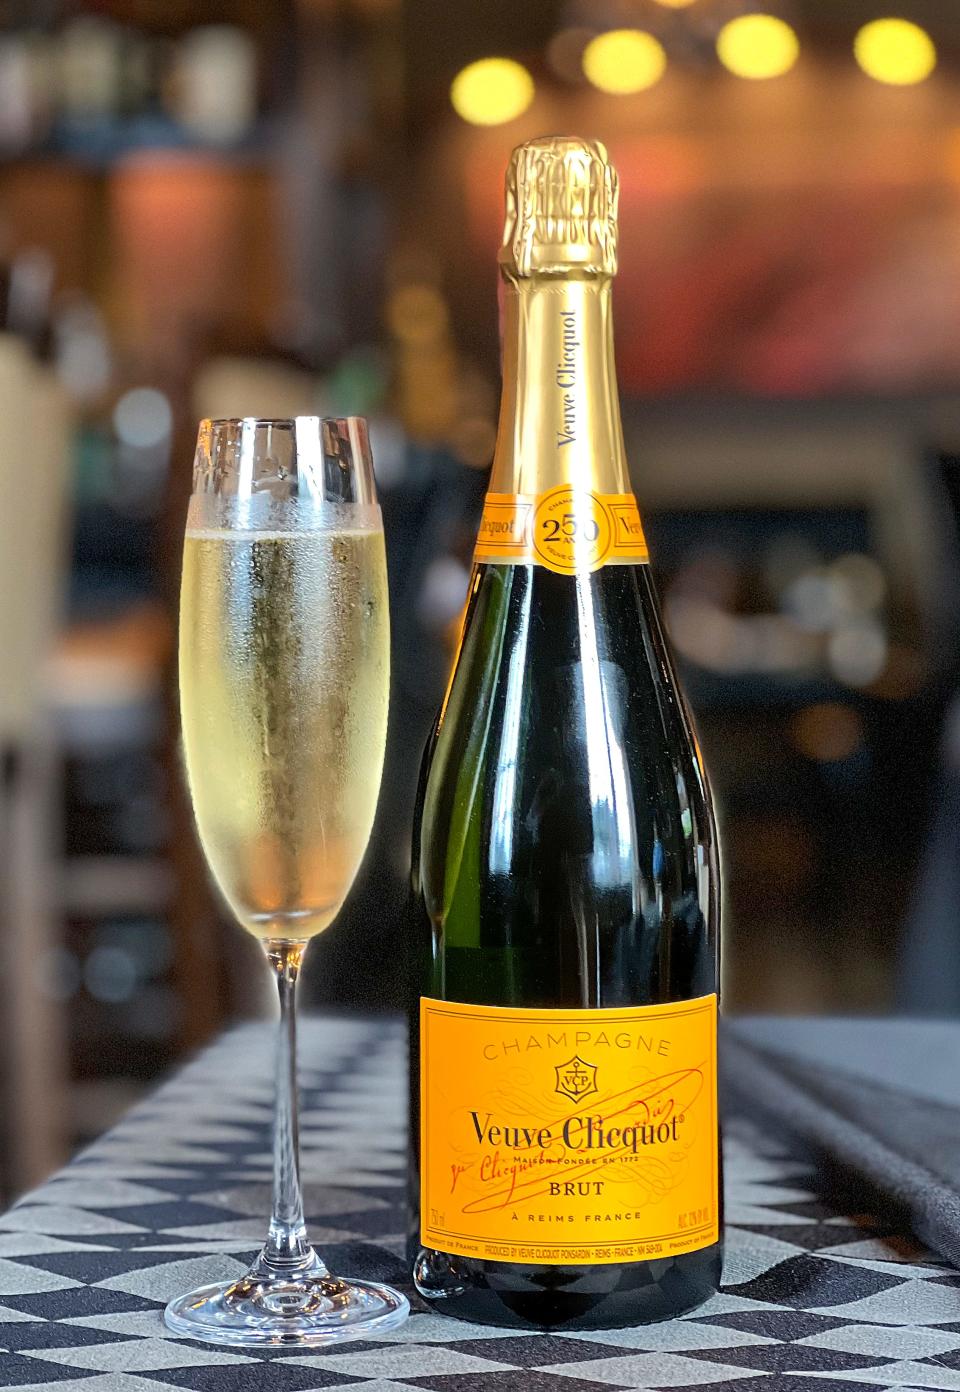 Veuve Clicquot brut is $18 per glass at Regency Wines in Fairlawn.